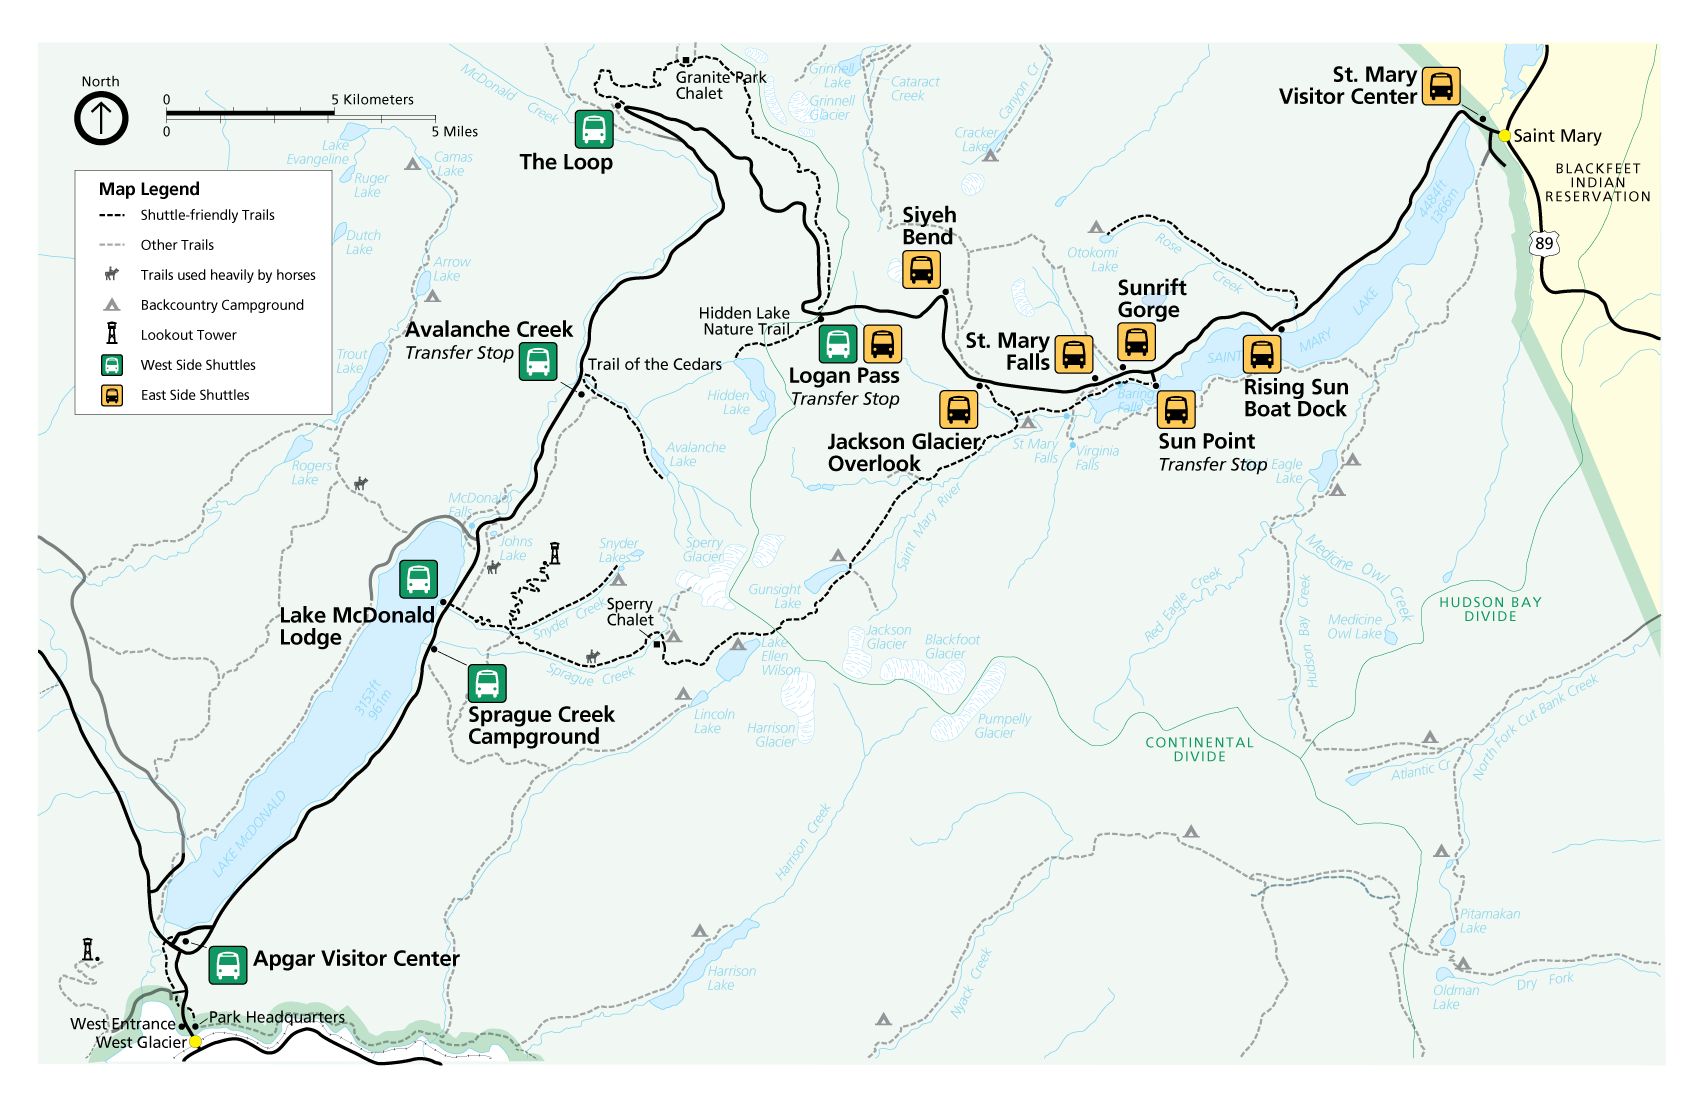 Map shows shuttle stops along the Going-to-the-Sun Road. Shuttle stops on the west side are shown in green. Shuttle stops for the east side are shown in yellow.